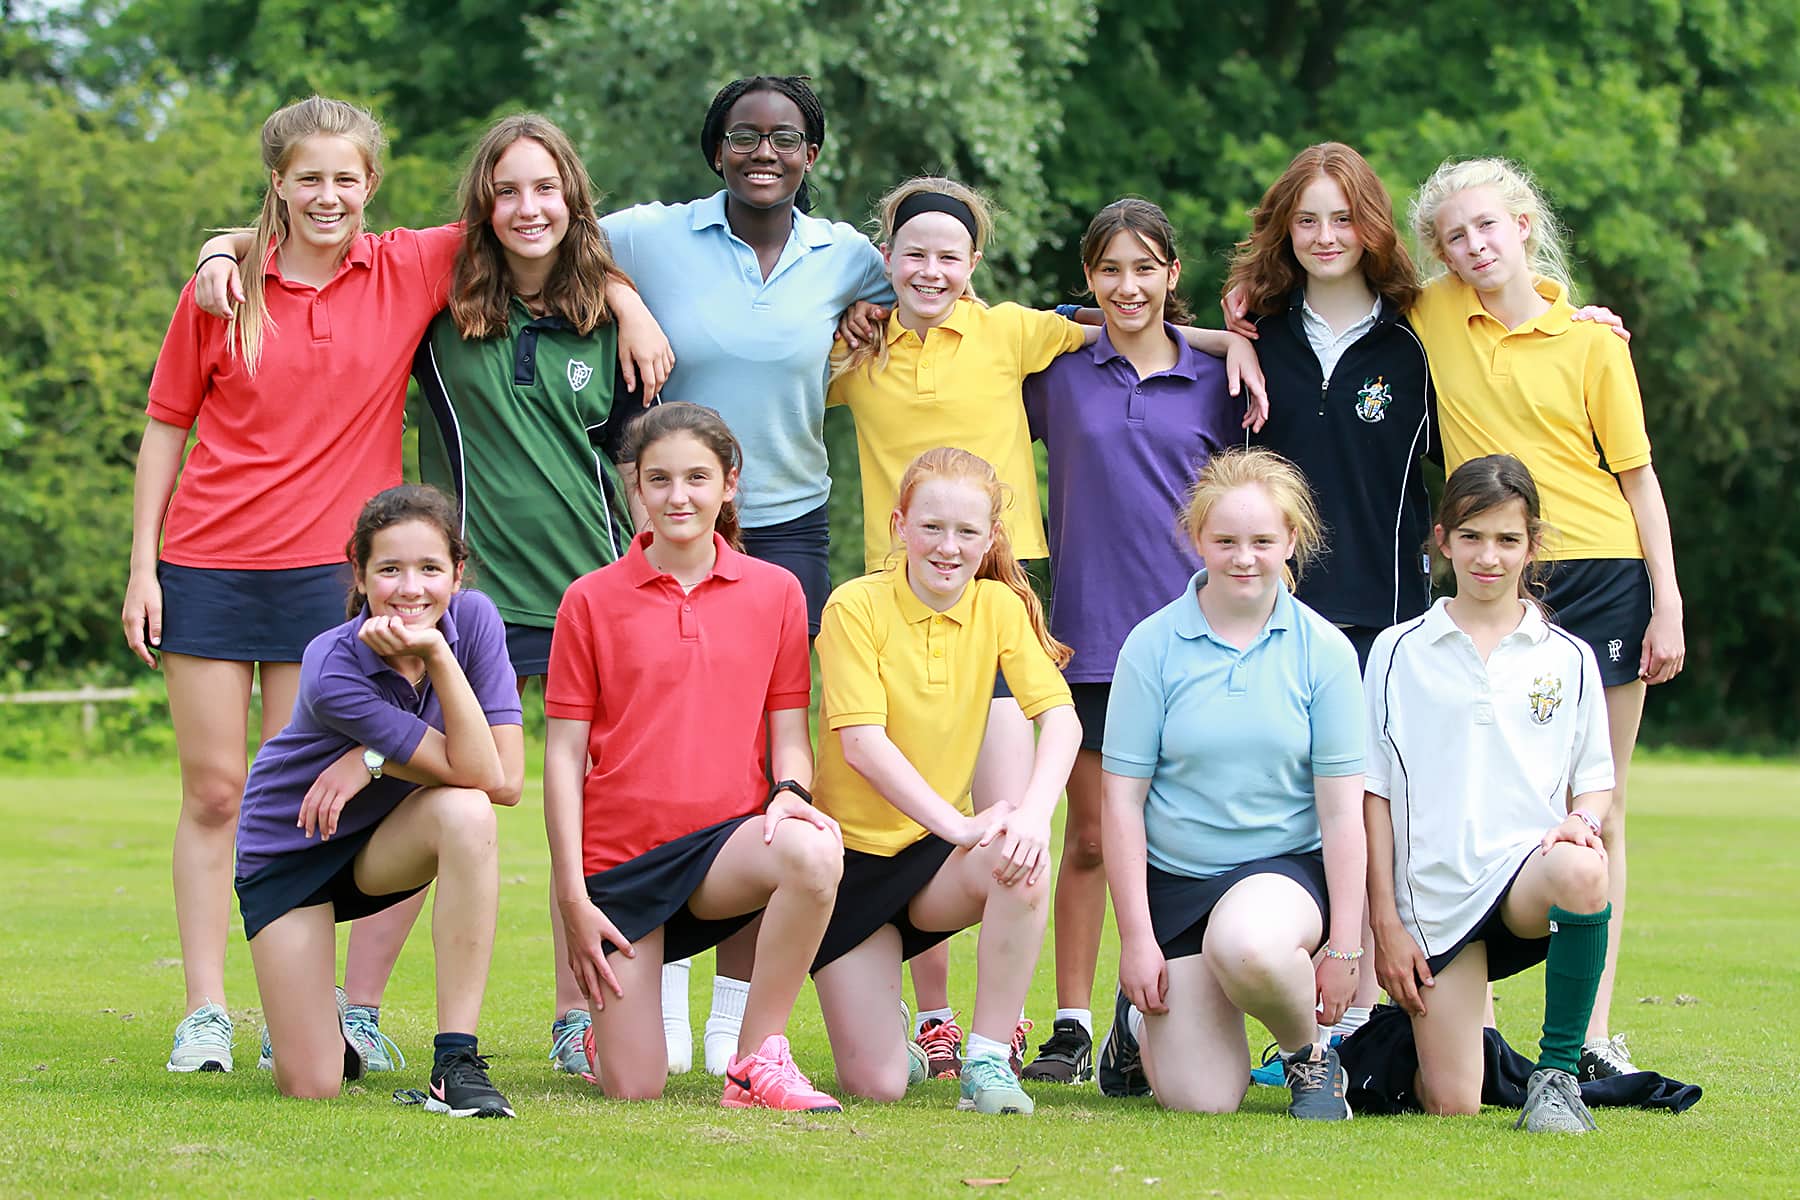 Girls taking part in sports activities